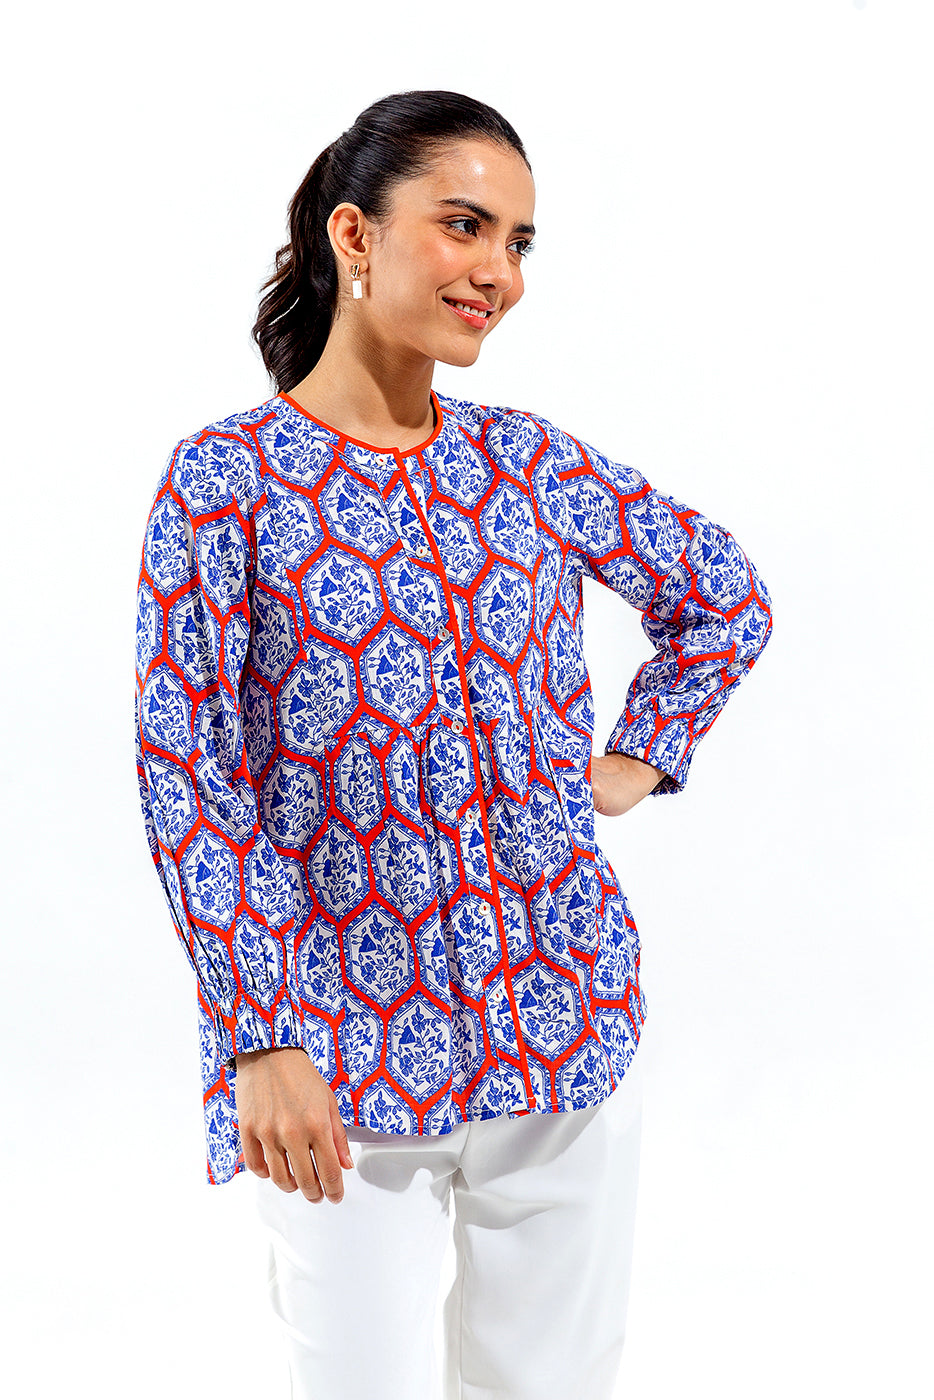 PRINTED FUSION TOP (PRET) - BEECHTREE